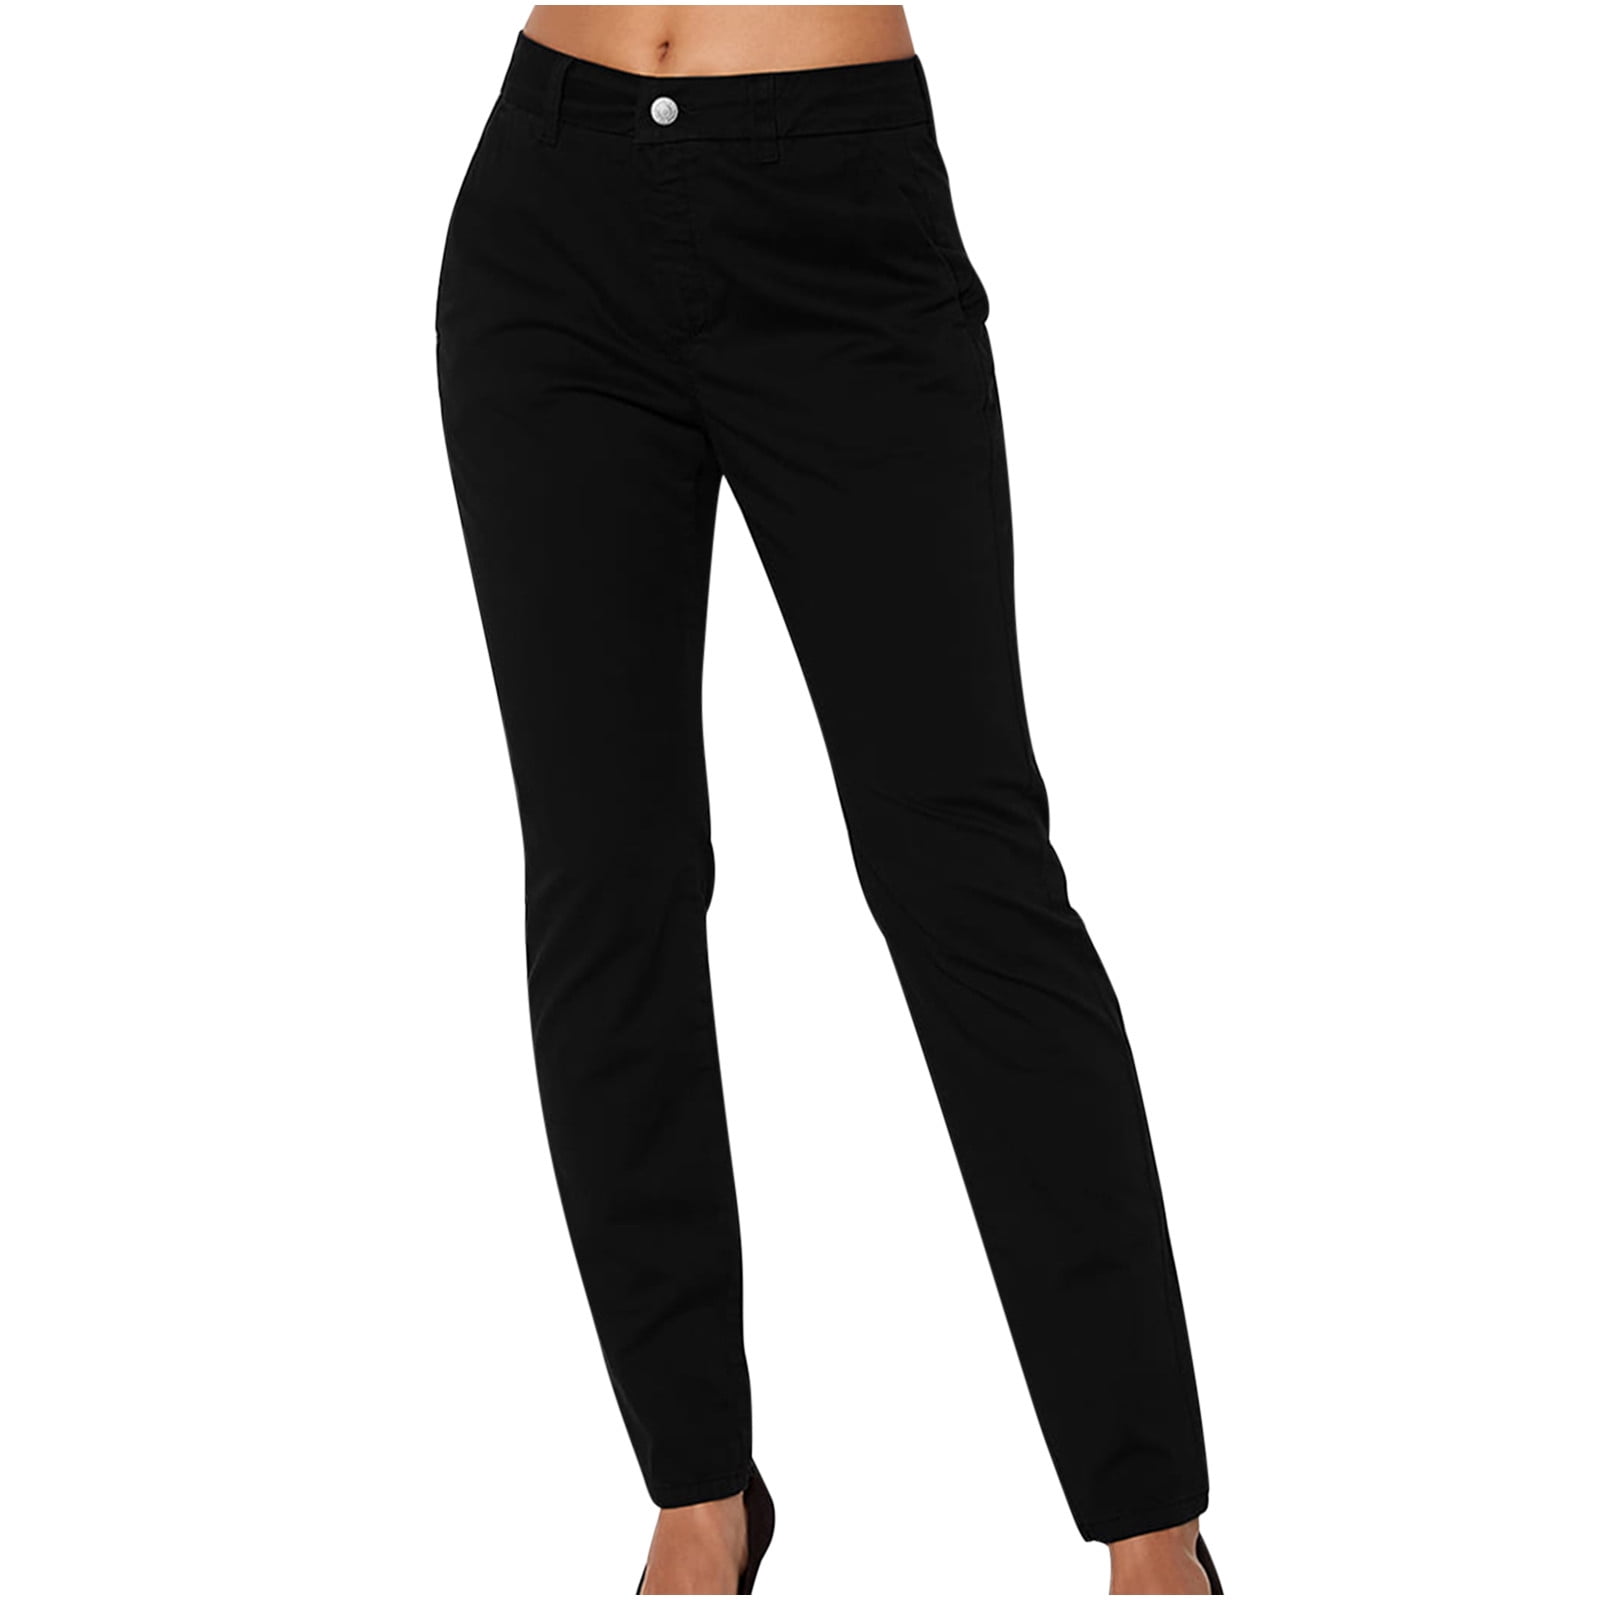 Pencil Pants Women New High Waist Office Formal Pants For Lady Stretchy  Pantolone High Waist Ankle Length Slim Woman Trousers From Xiatian4, $76.3  | DHgate.Com